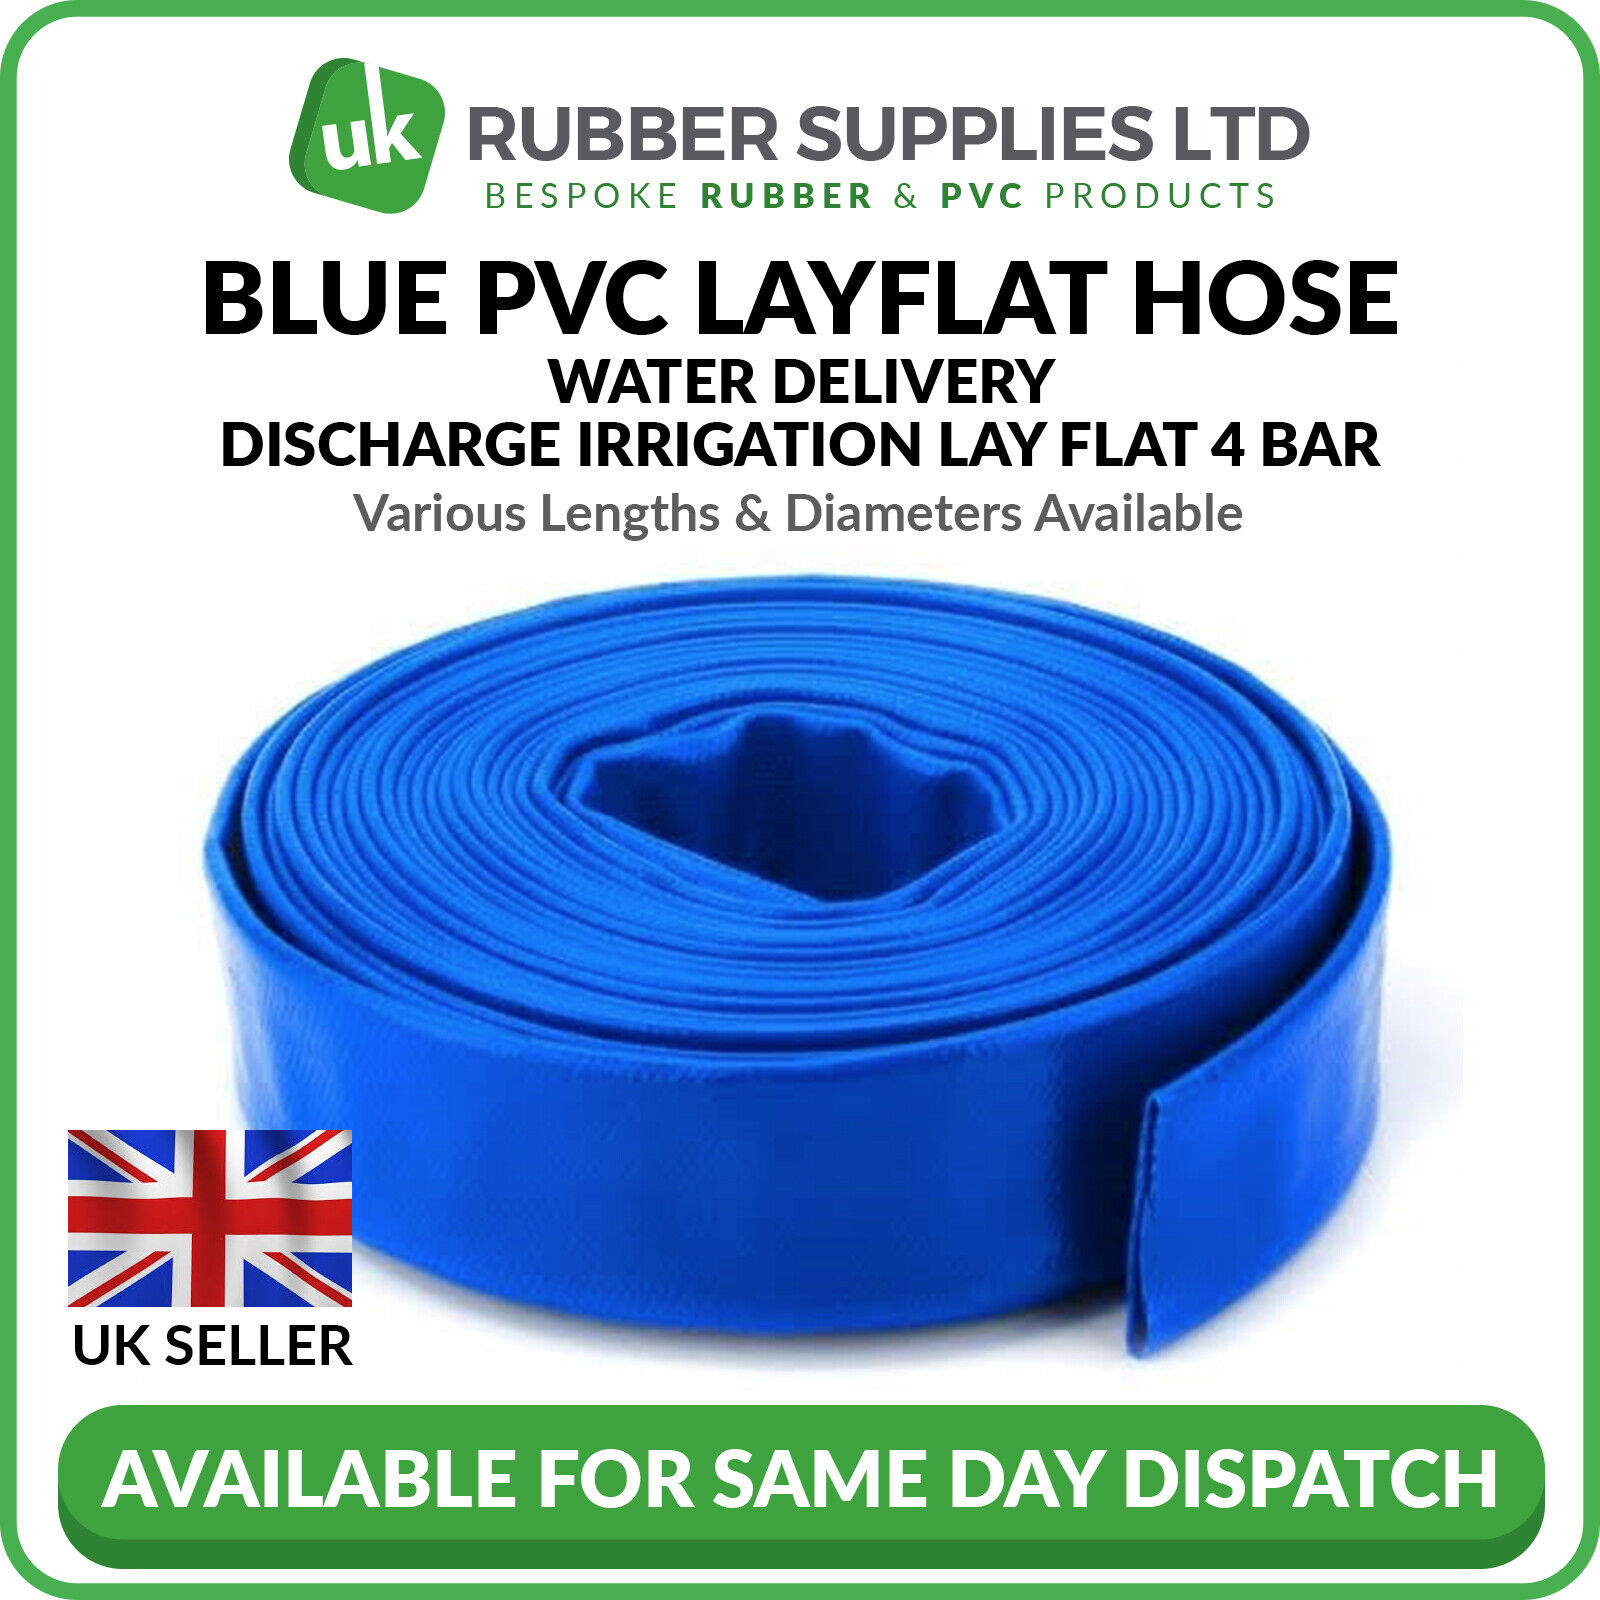 Blue PVC Layflat Hose Water Discharge Pump Delivery 4 BAR 1